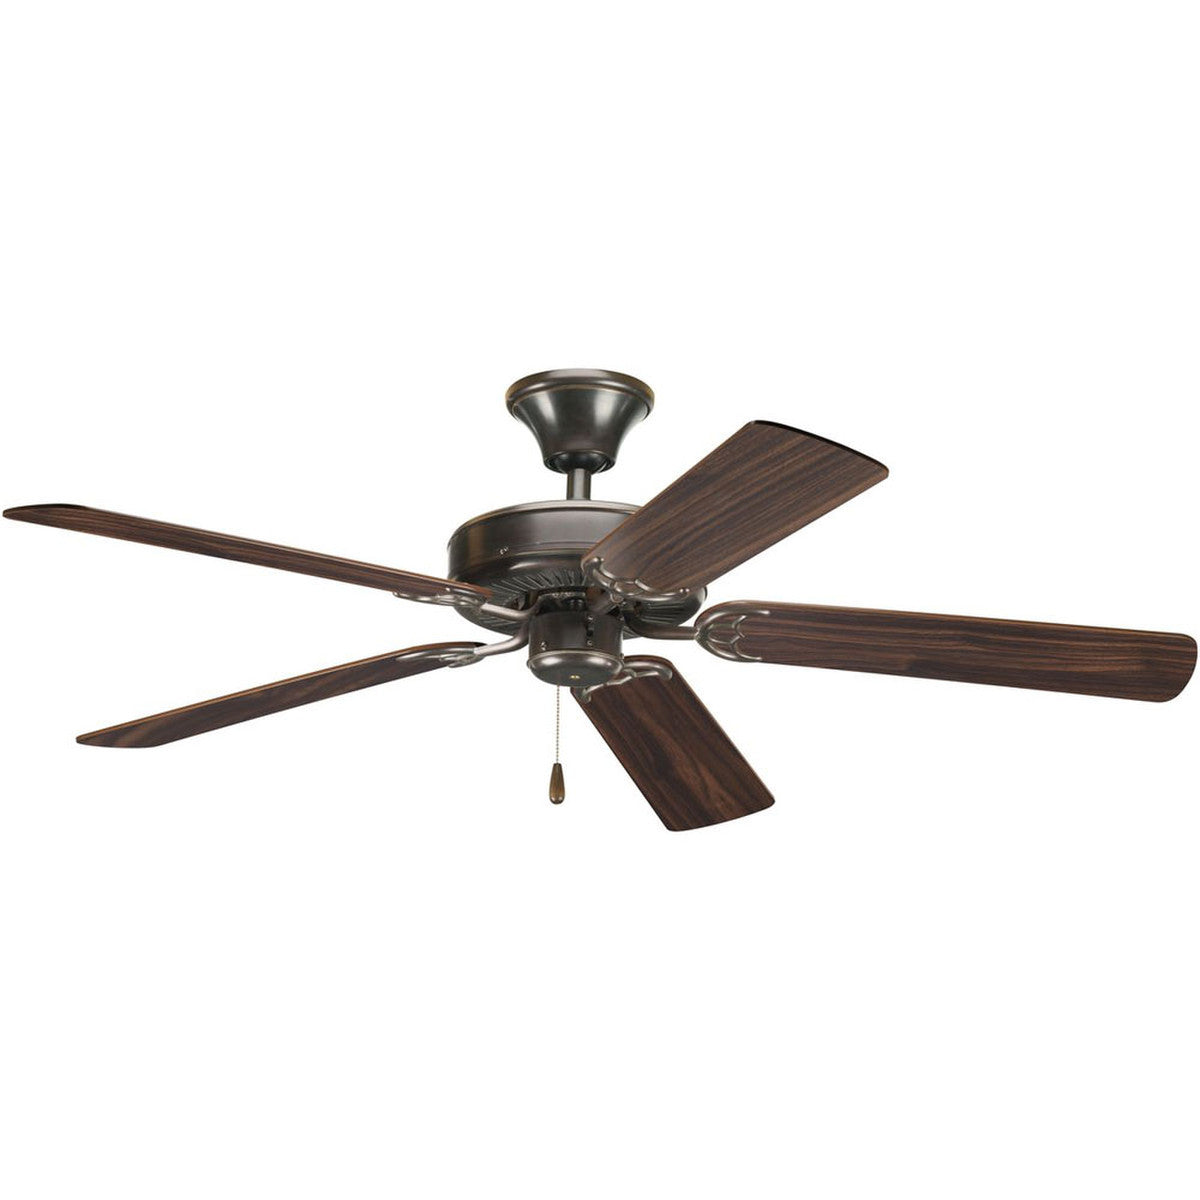 AirPro Builder 52 Inch Ceiling Fan With Pull Chain, Reversible Blades, Dual-mount